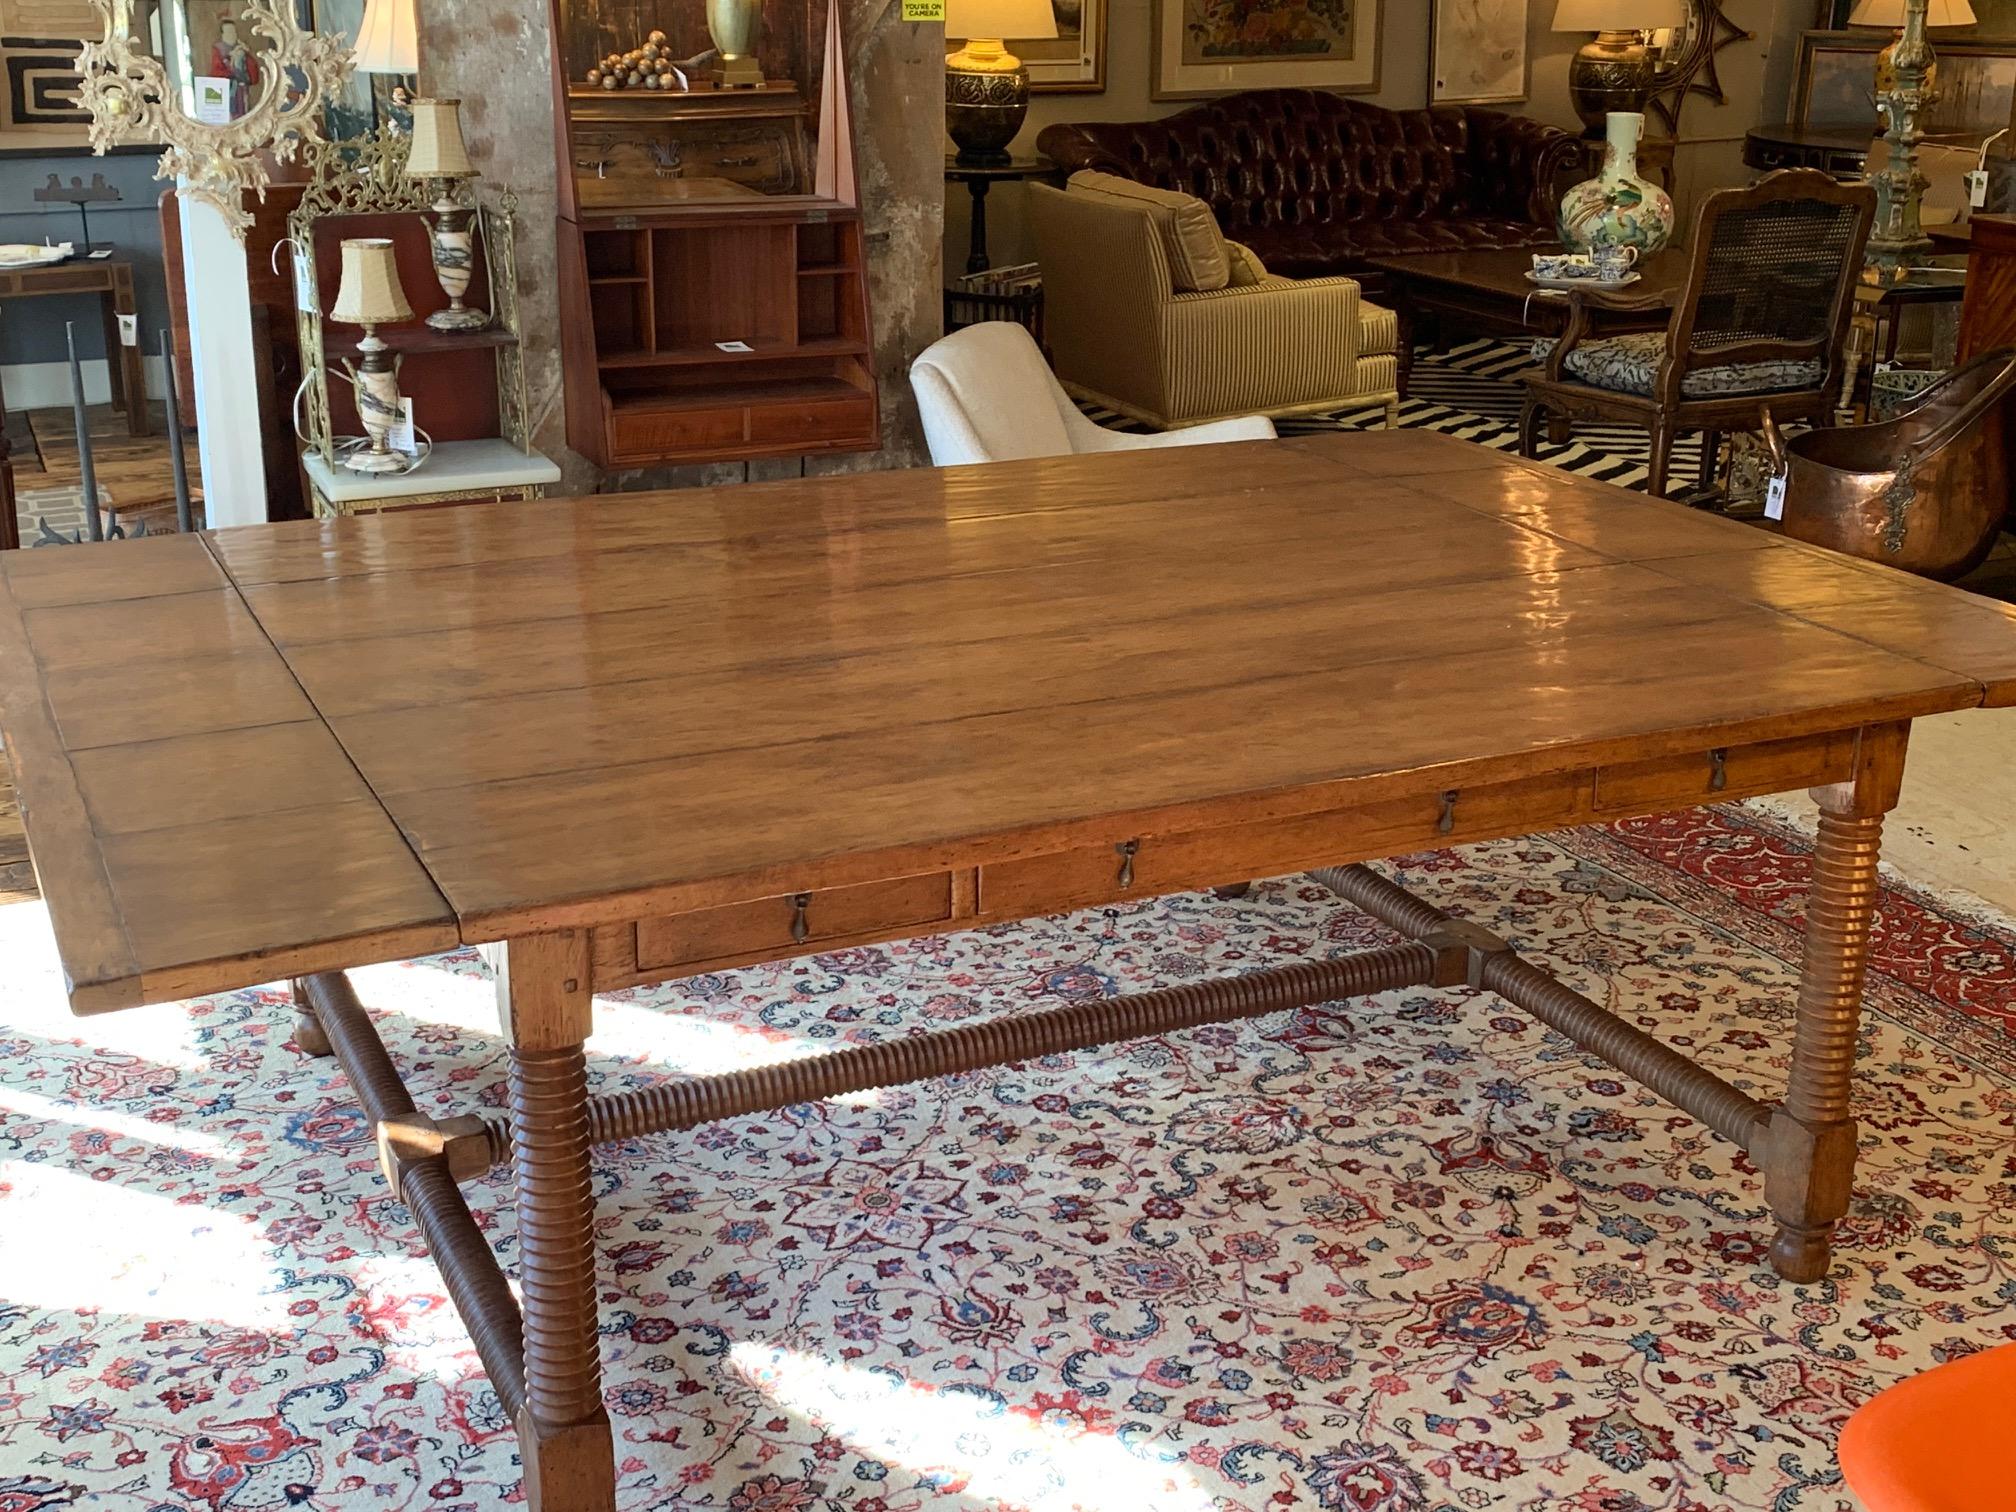 Custom center or dining table having planked walnut top, drop-leaf ends, carved screw legs, H-stretcher on ball feet, and three drawers on the frieze of both sides with antique brass Dutch-style drop pulls. Table is comparable to Rose Tarlow Melrose